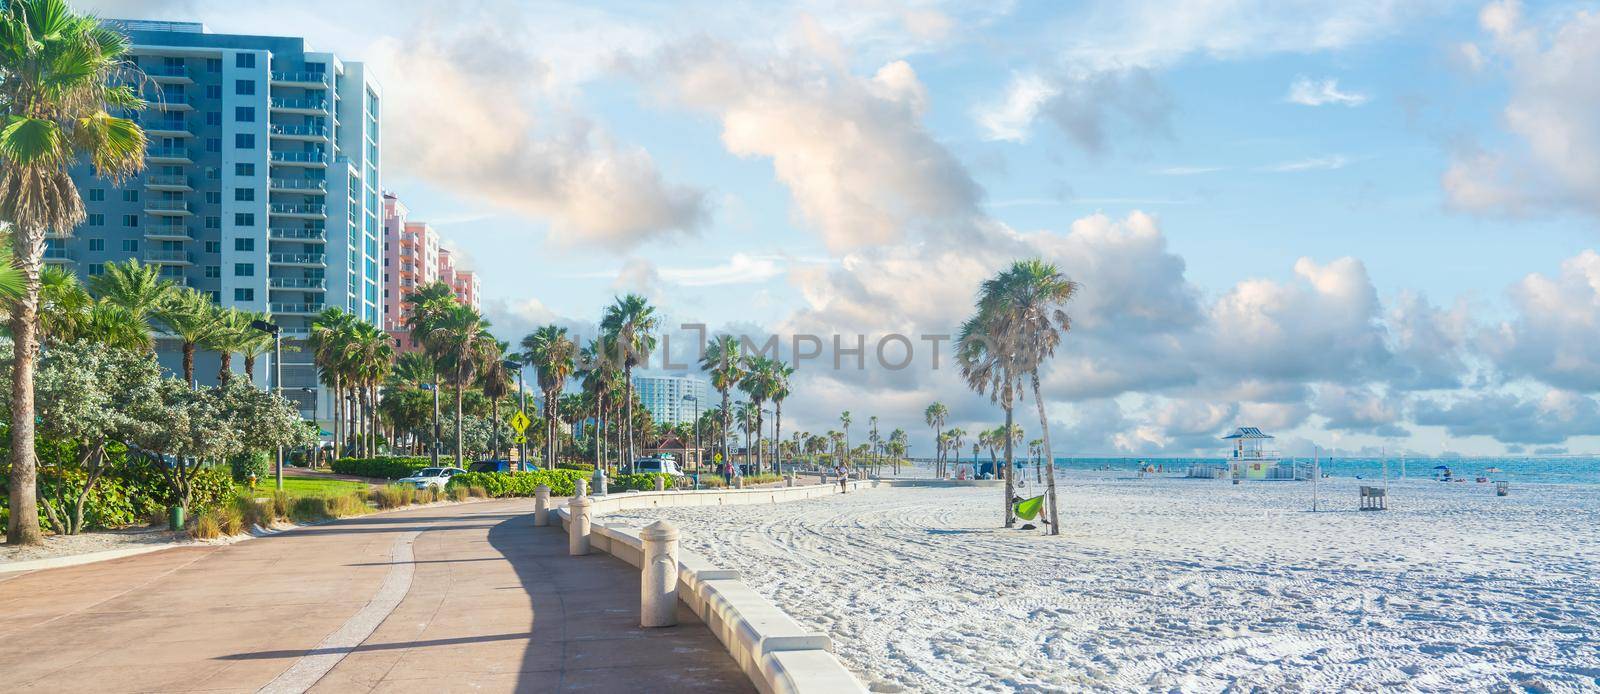 Beautiful Clearwater beach with white sand in Florida USA by Mariakray